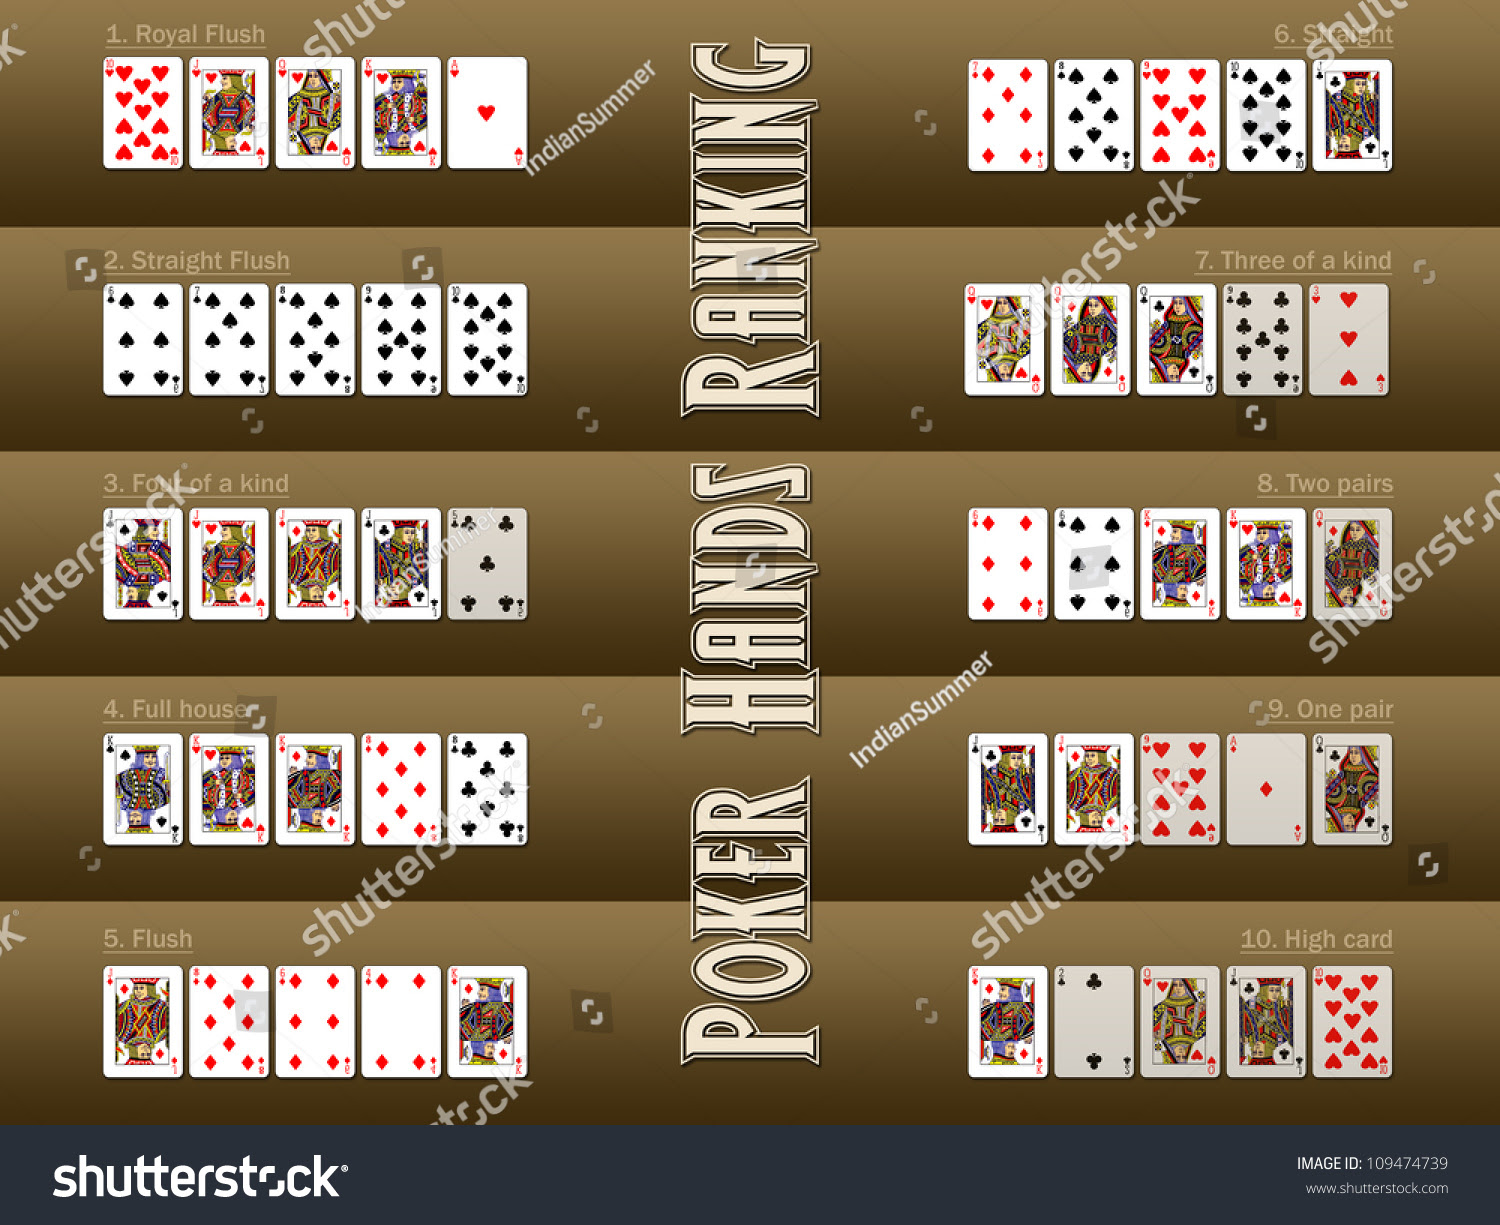 What Are the Odds of Getting a Royal Flush in Poker?